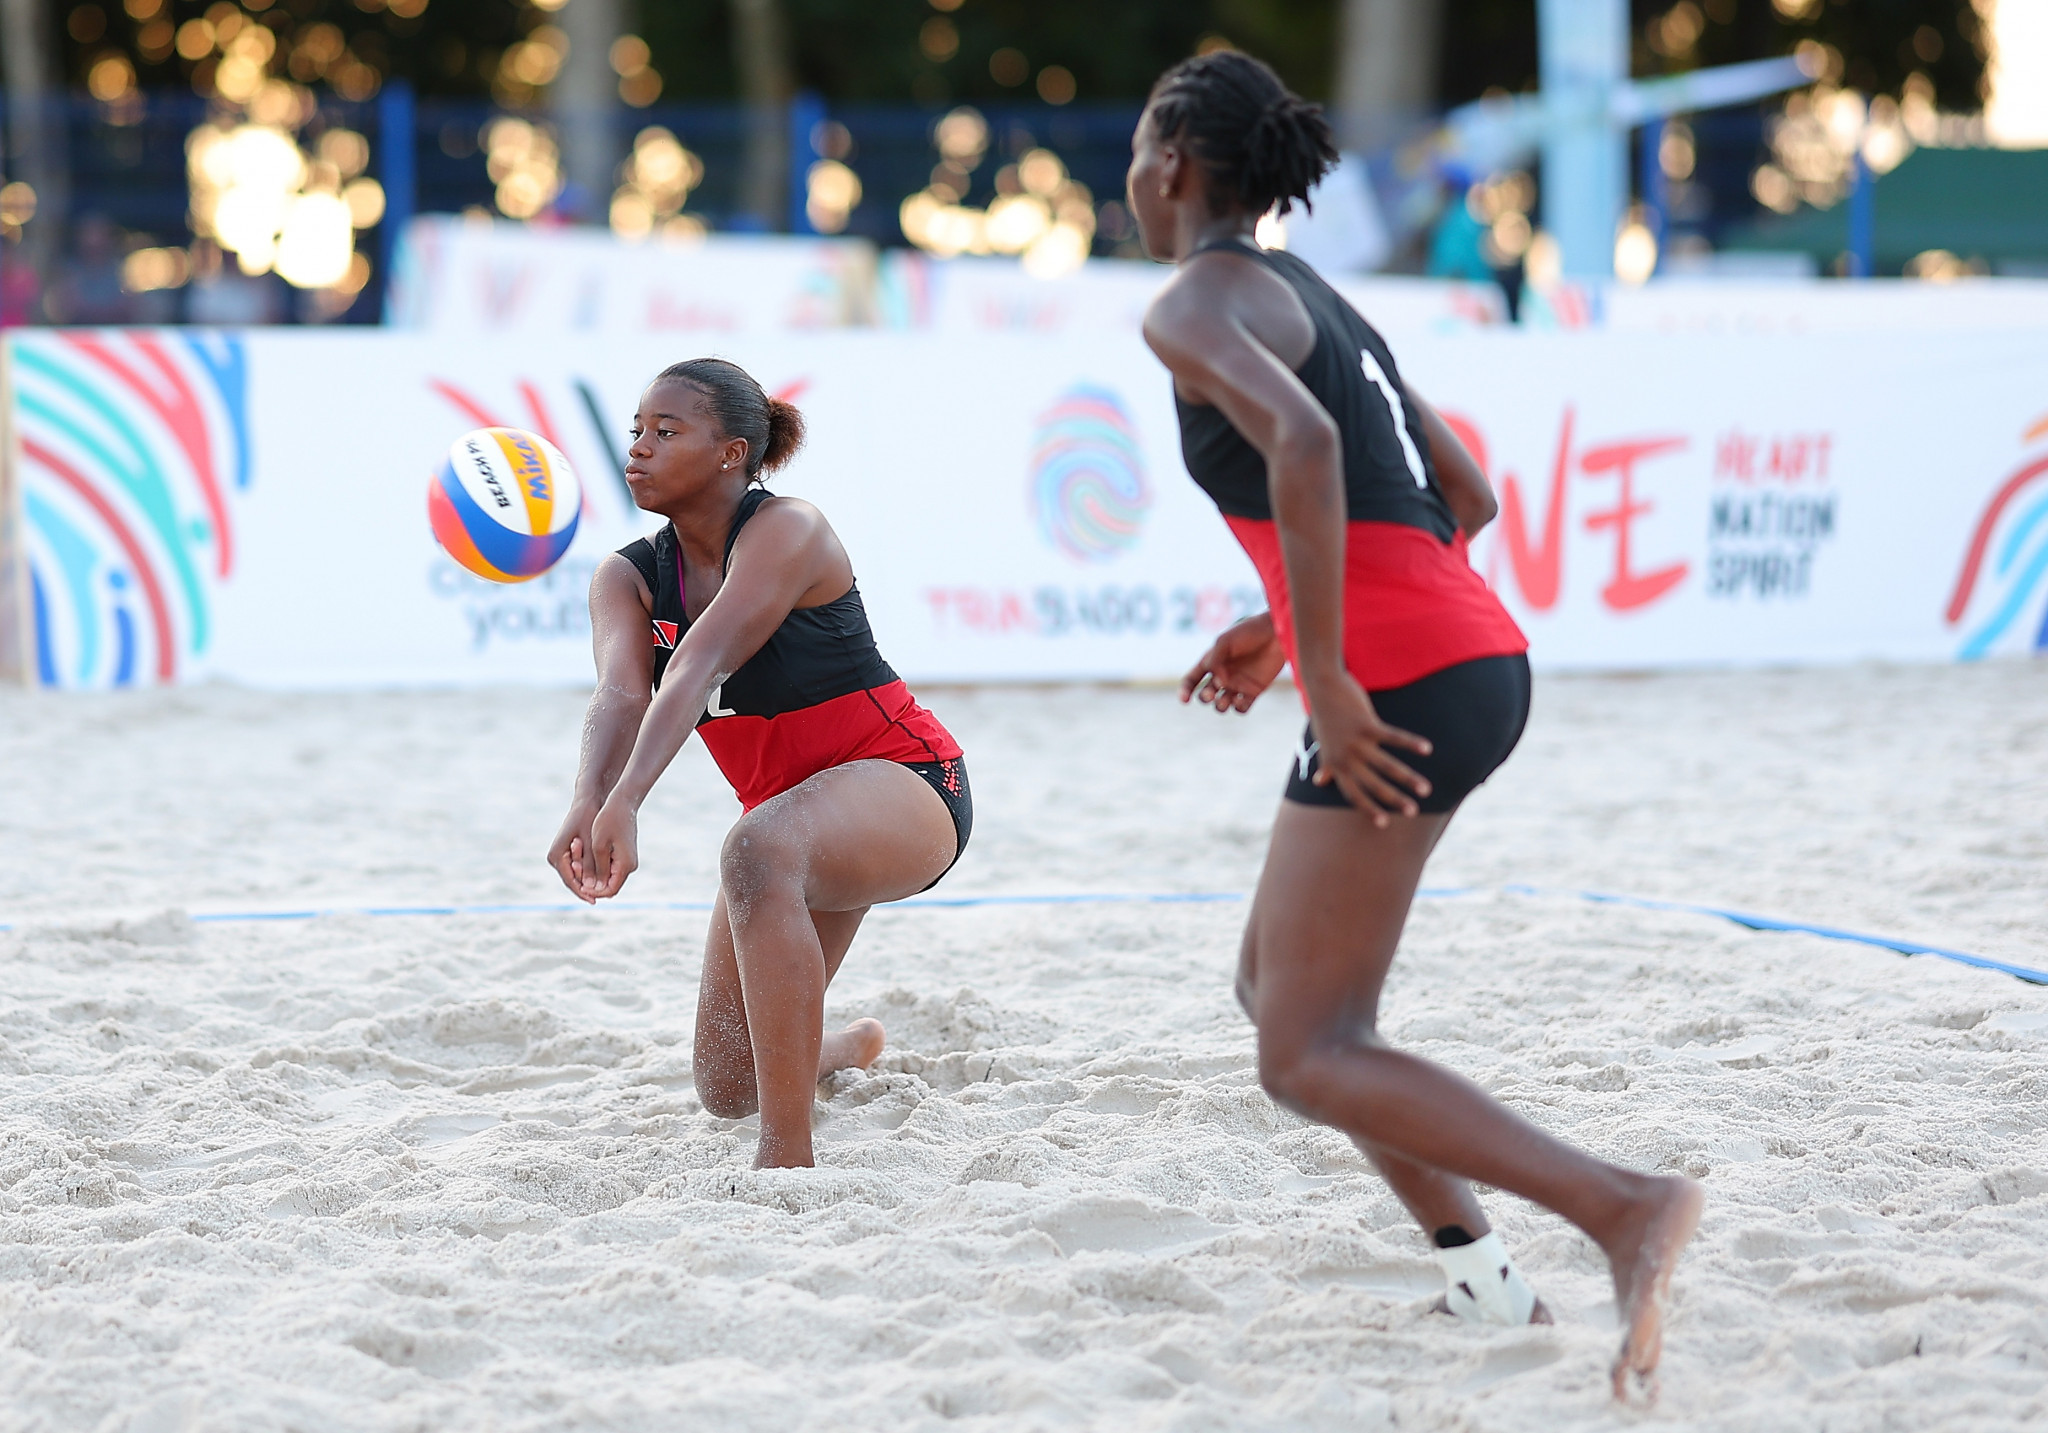 The beach volleyball arena at Black Rock was built especially for the Commonwealth Youth Games ©Getty Images